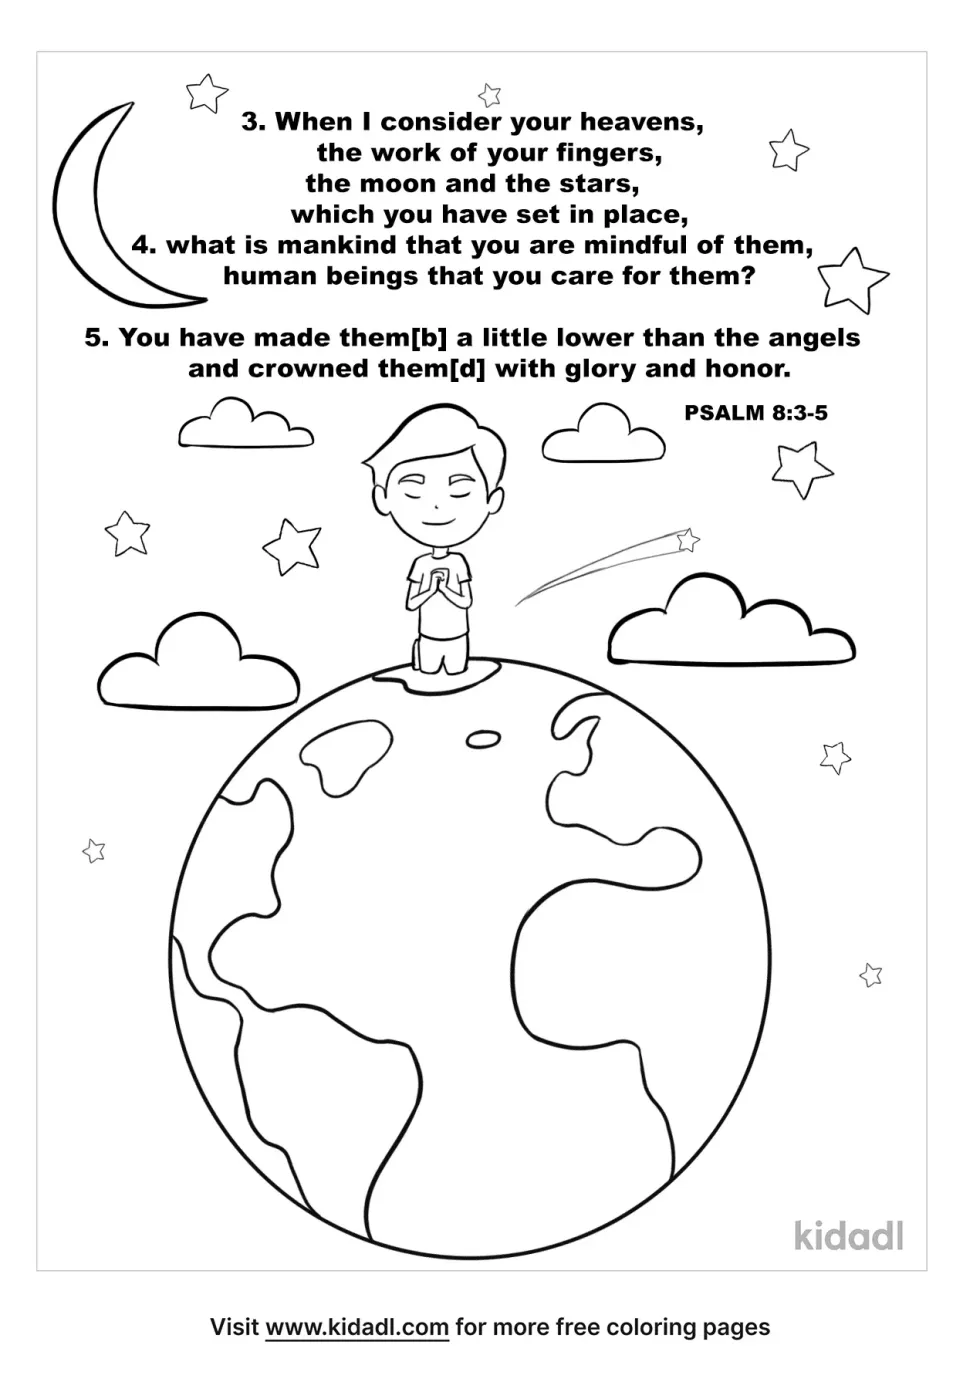 Psalm 8:3-5 Coloring Page